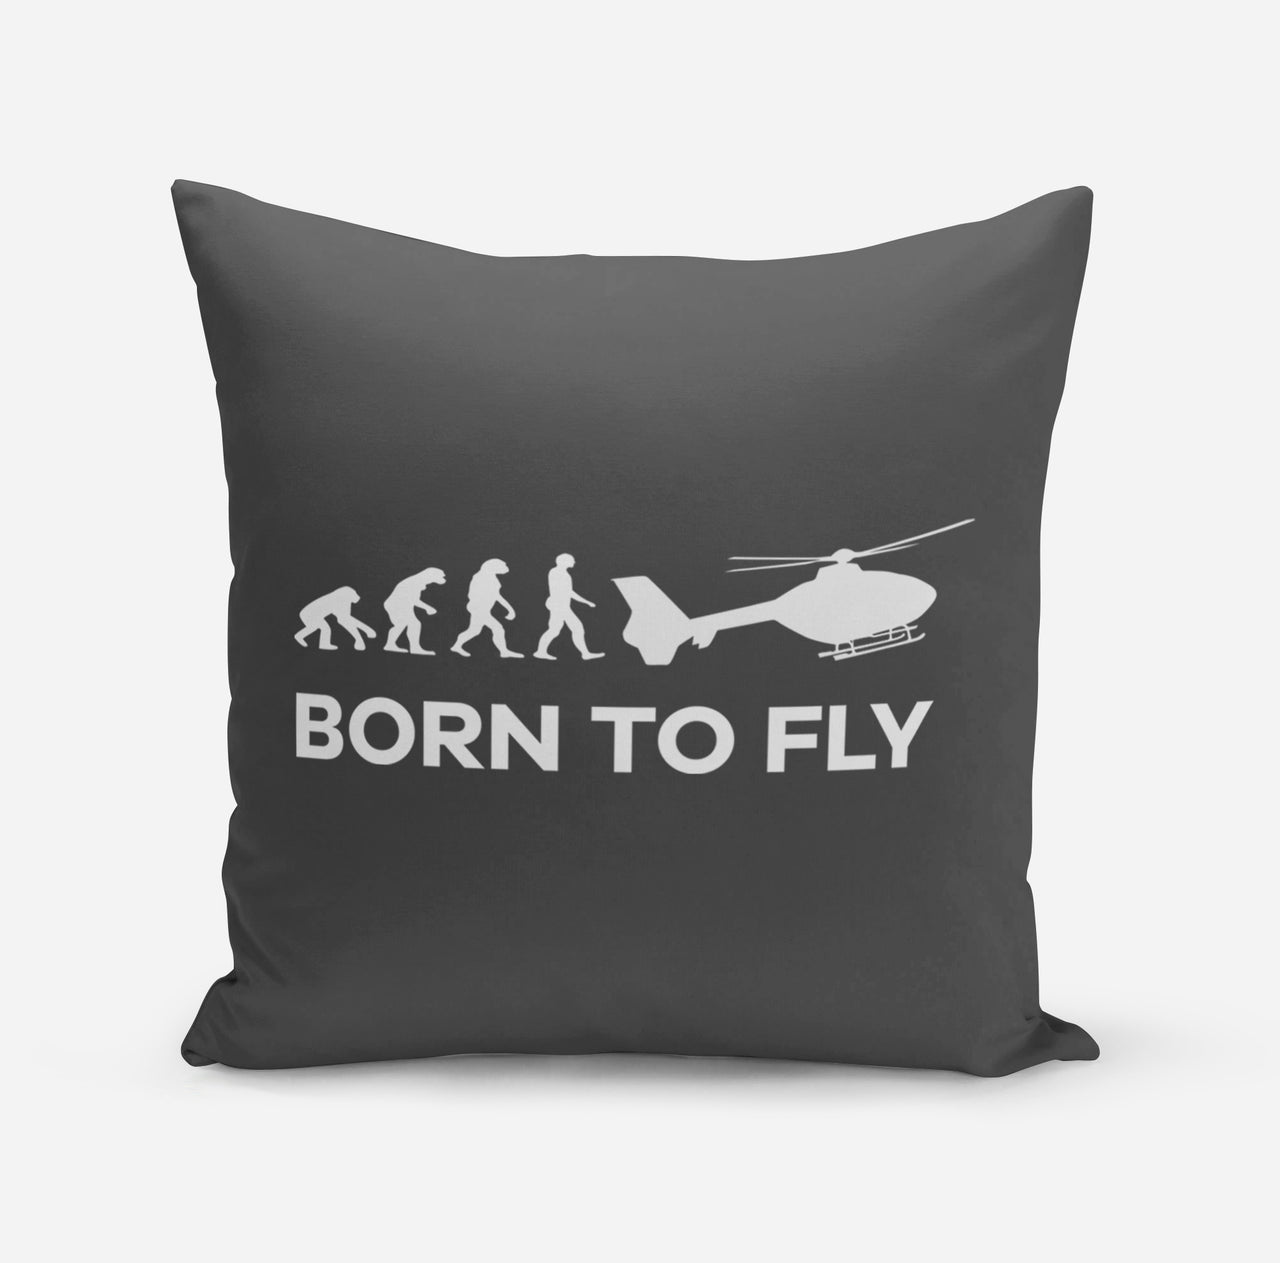 Born To Fly Helicopter Designed Pillows